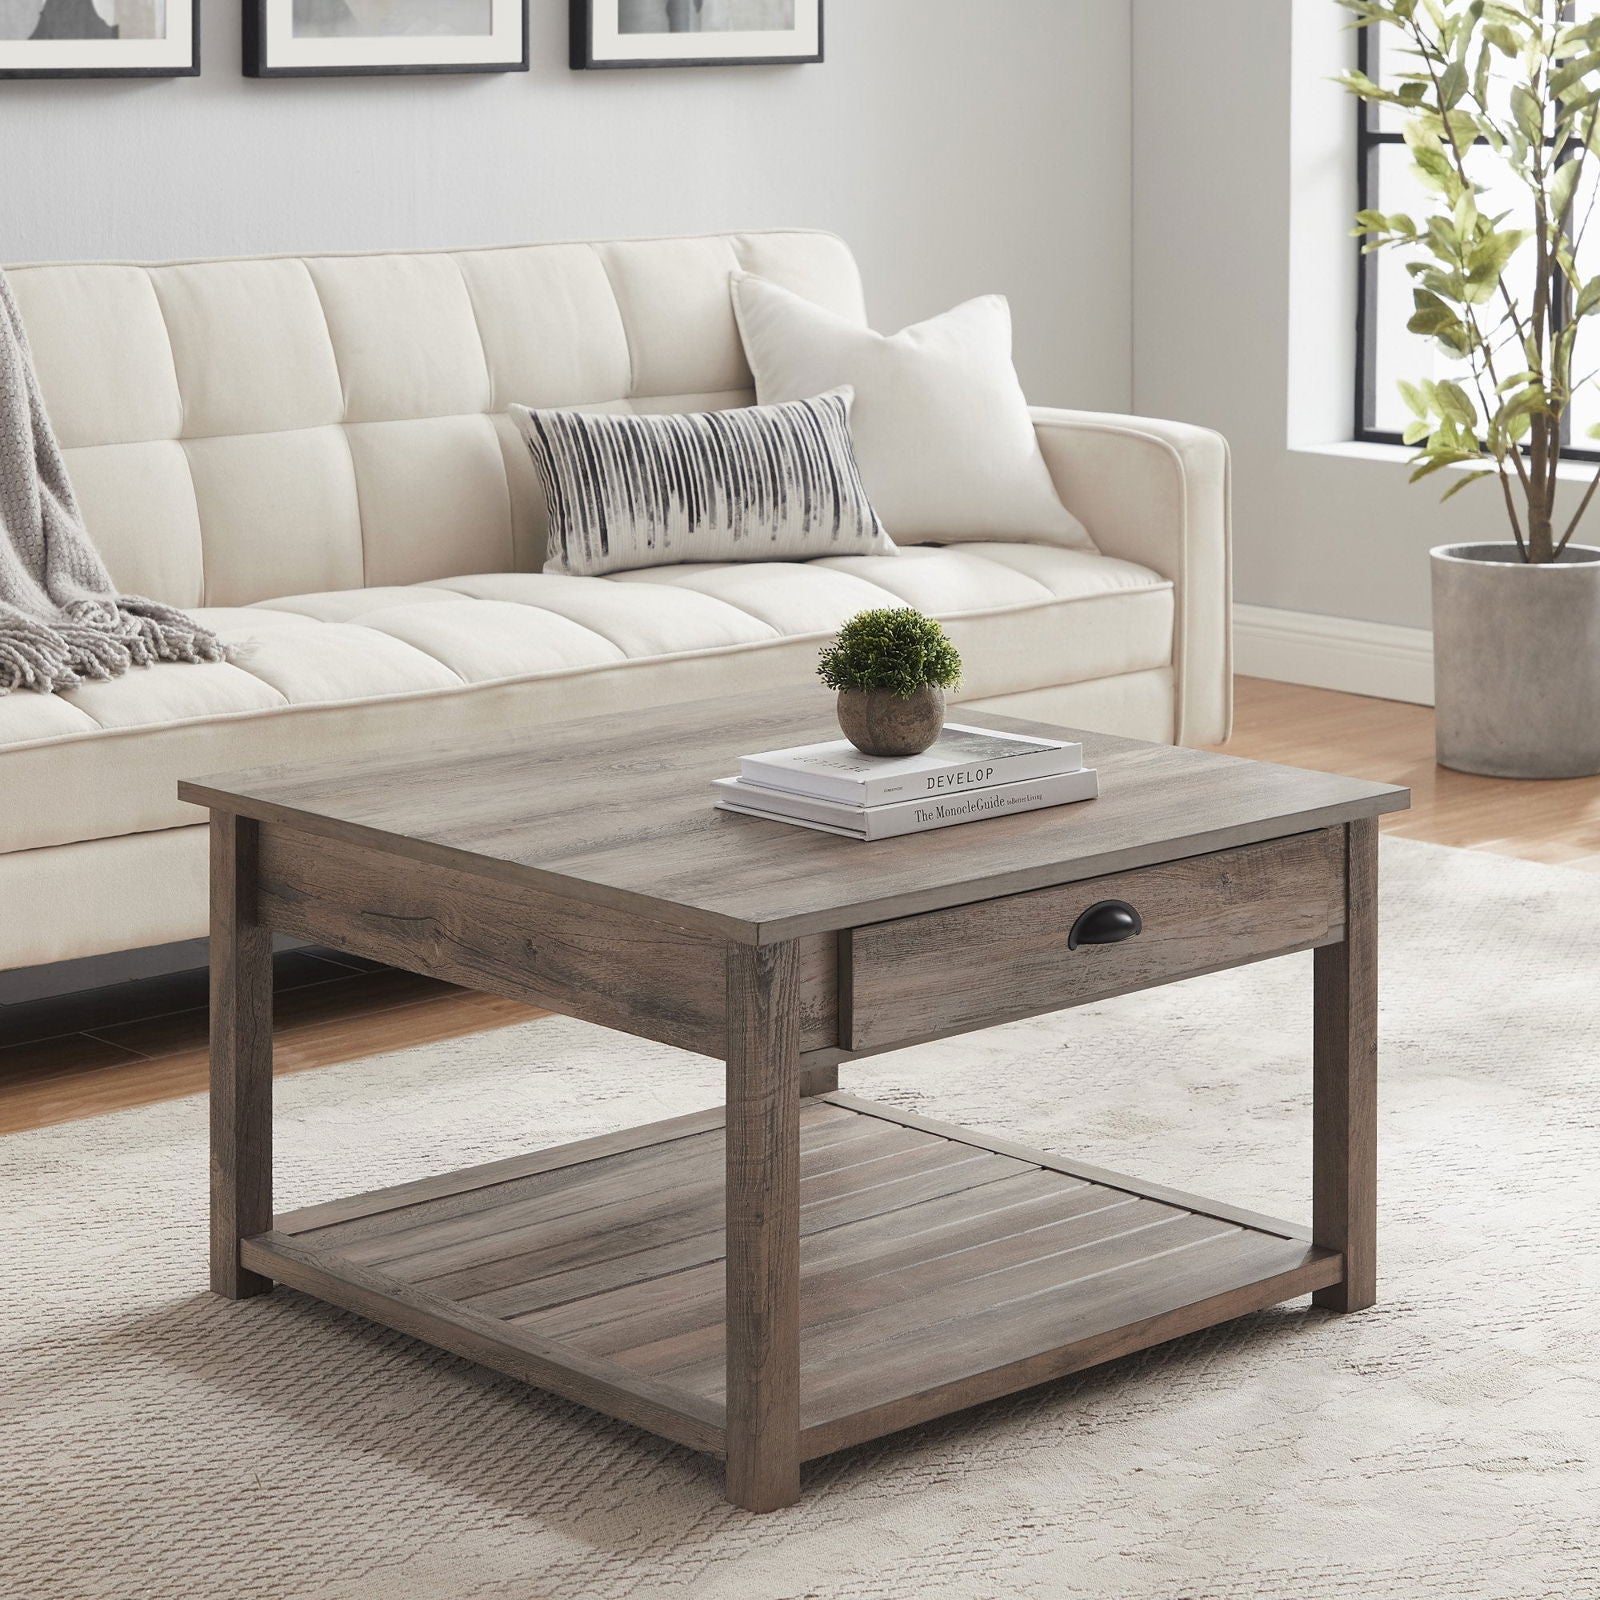 Country Coffee Table - Mac & Mabel